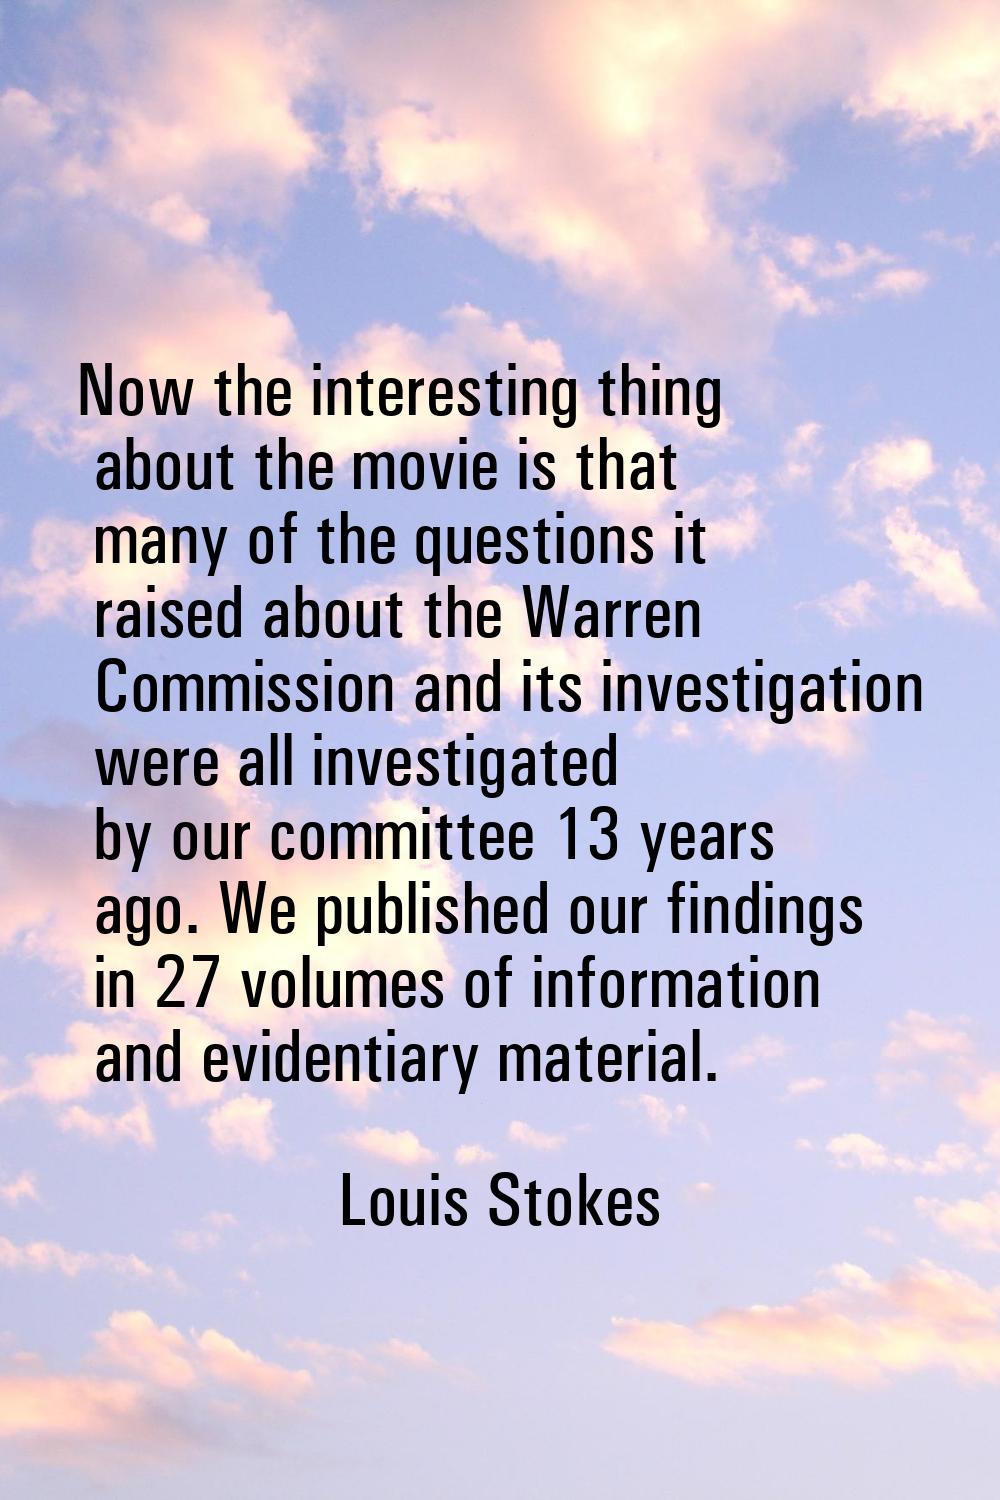 Now the interesting thing about the movie is that many of the questions it raised about the Warren 